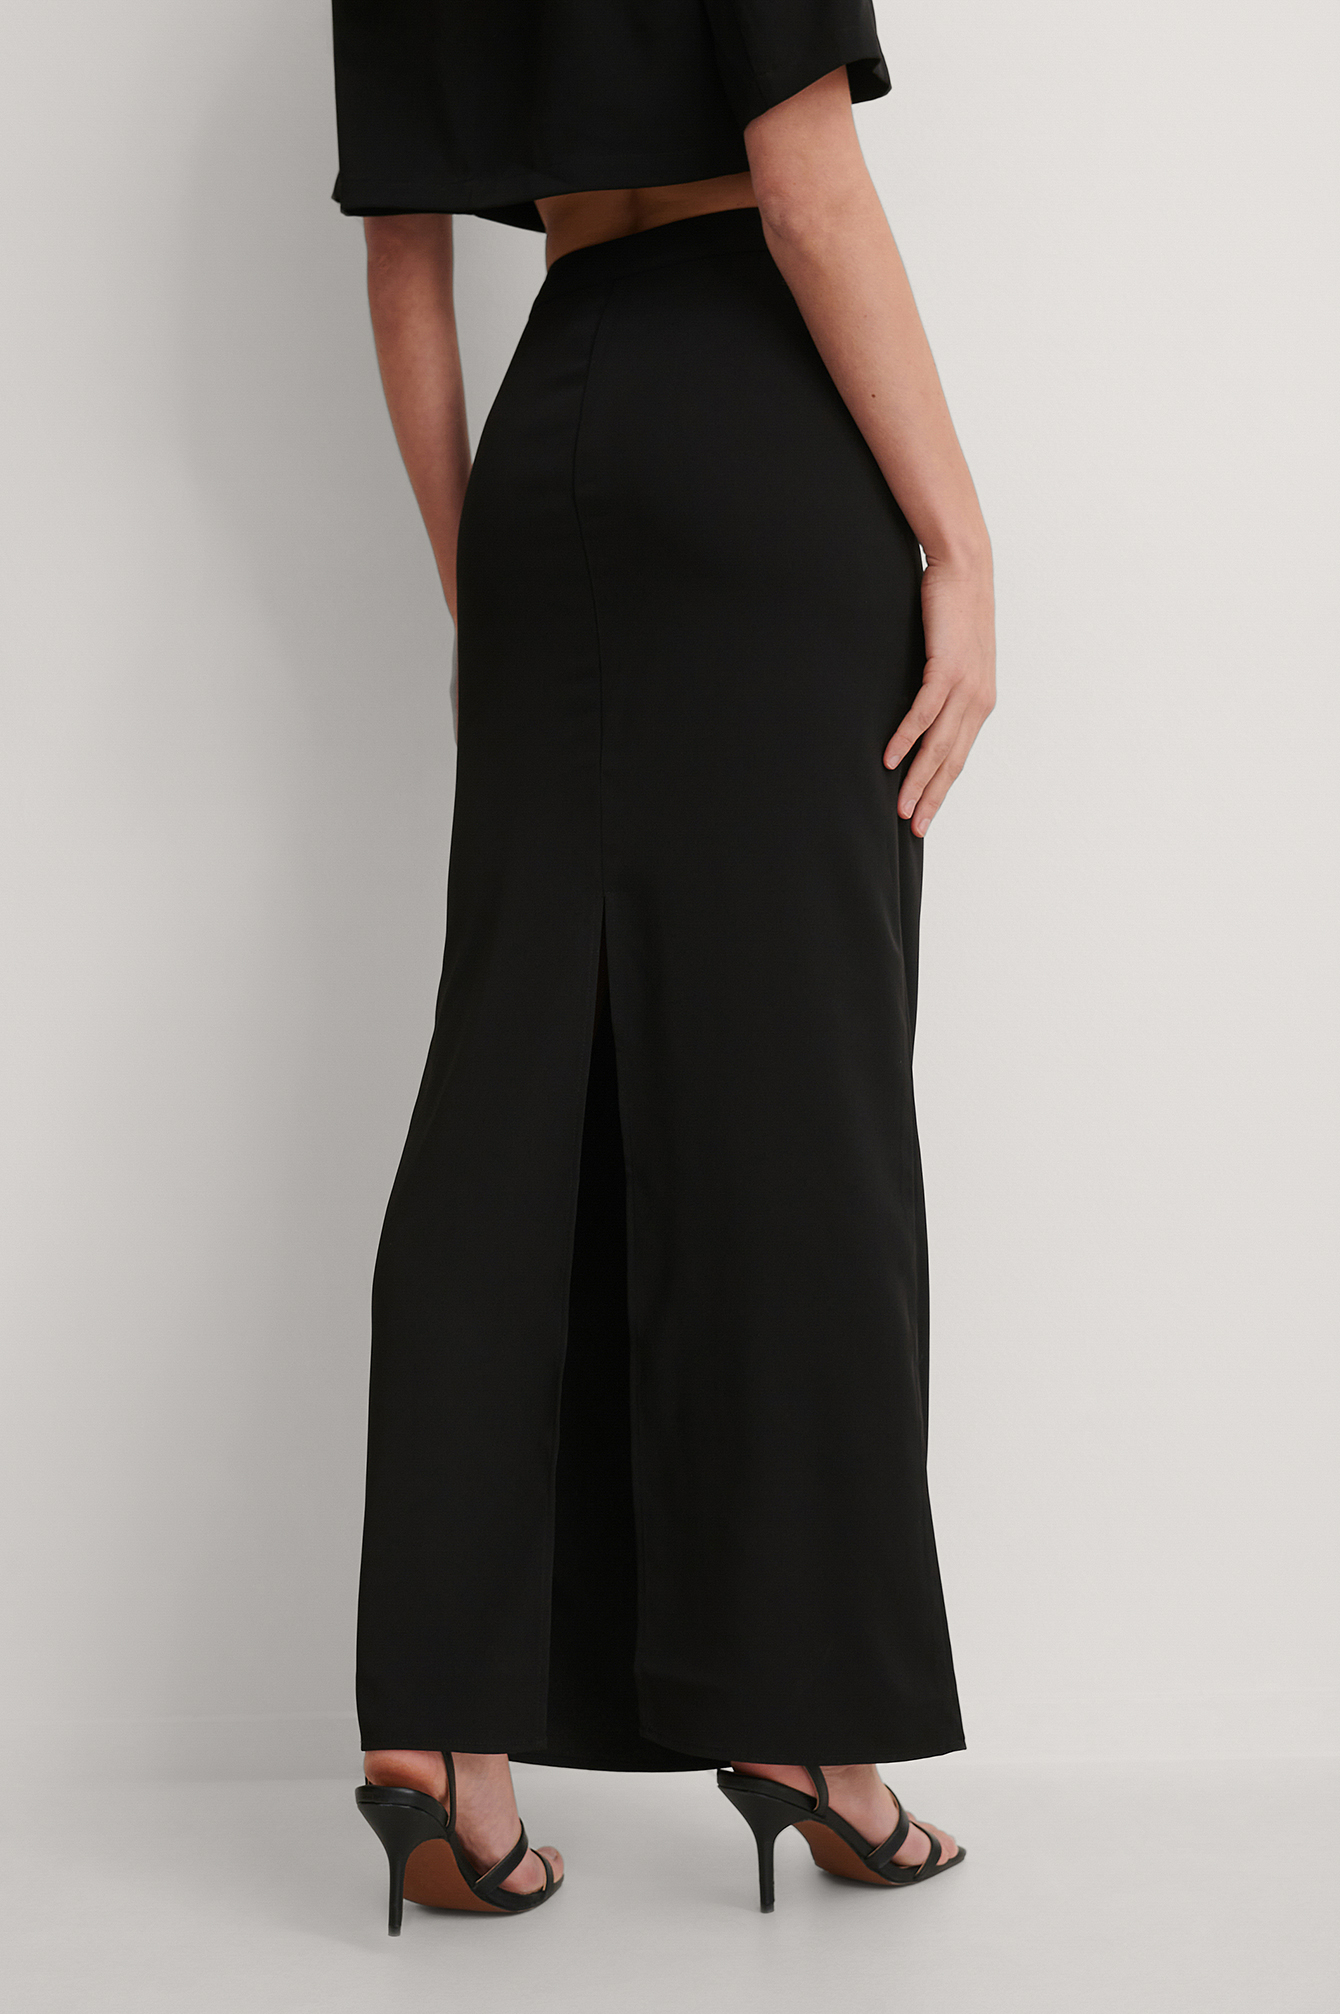 maxi skirt with high slits on both sides